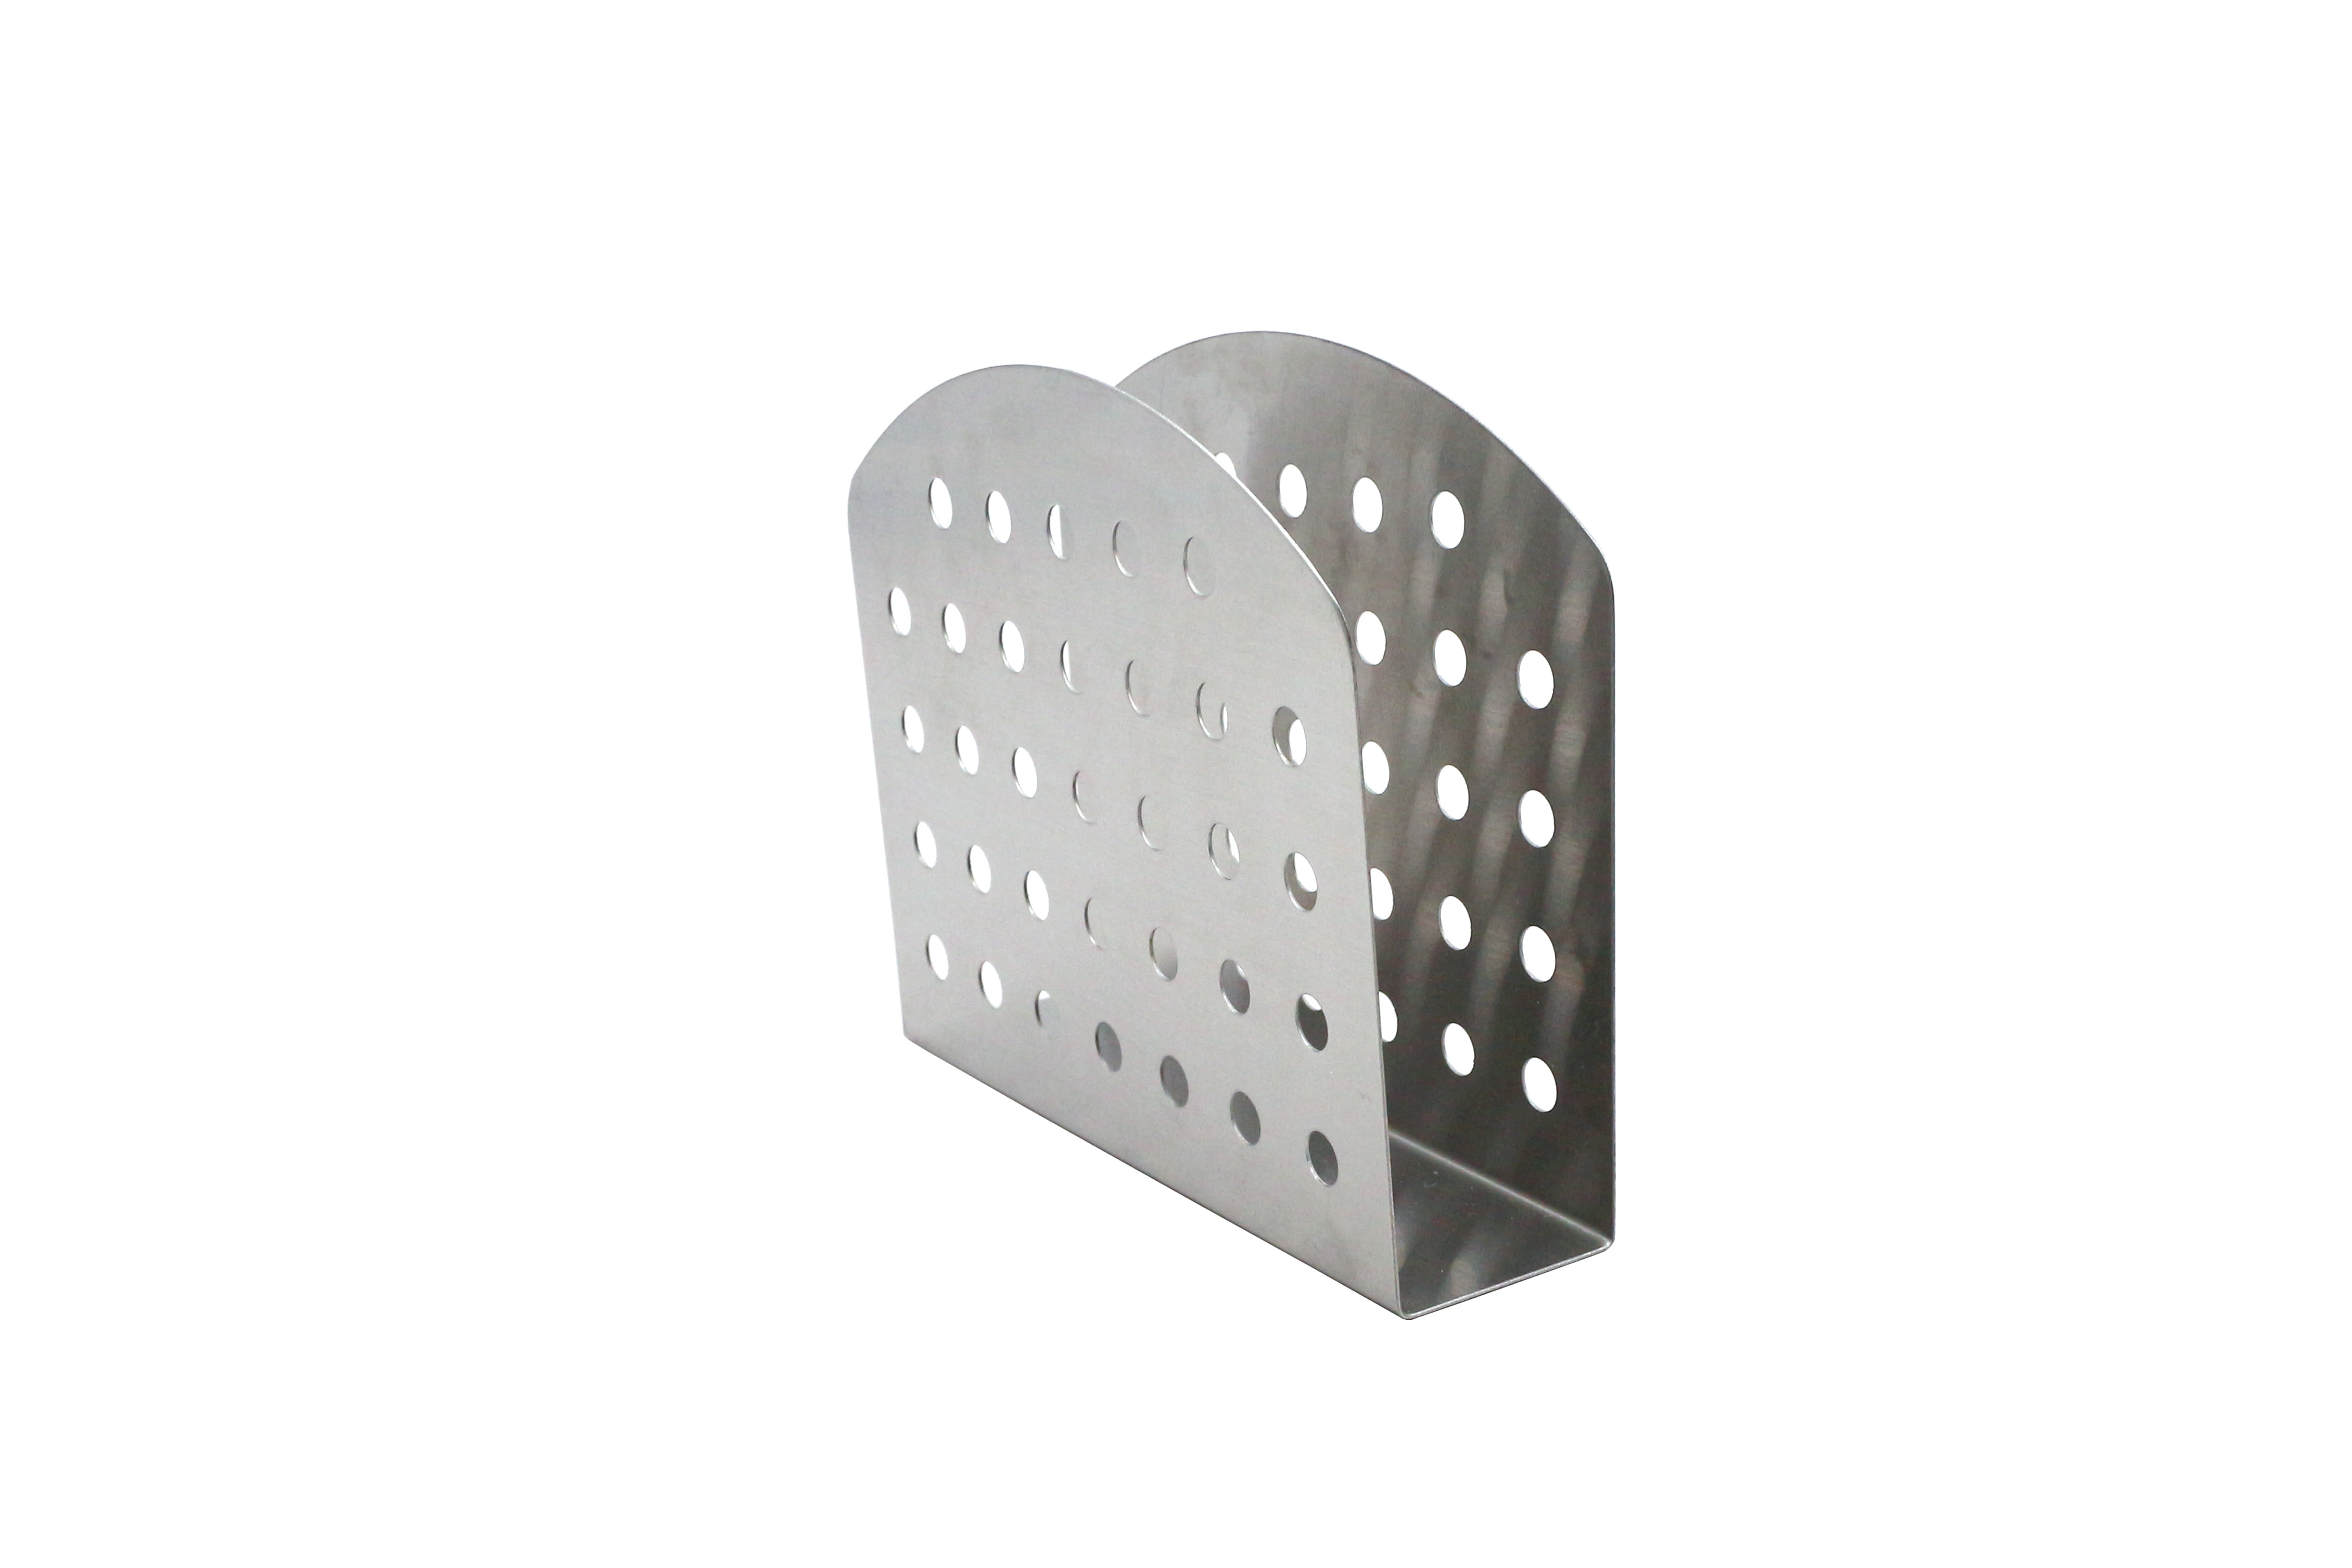 FOH Dots Collection Stainless Steel Napkin Holder - 5 1/2L x 5 1/2W x 4H